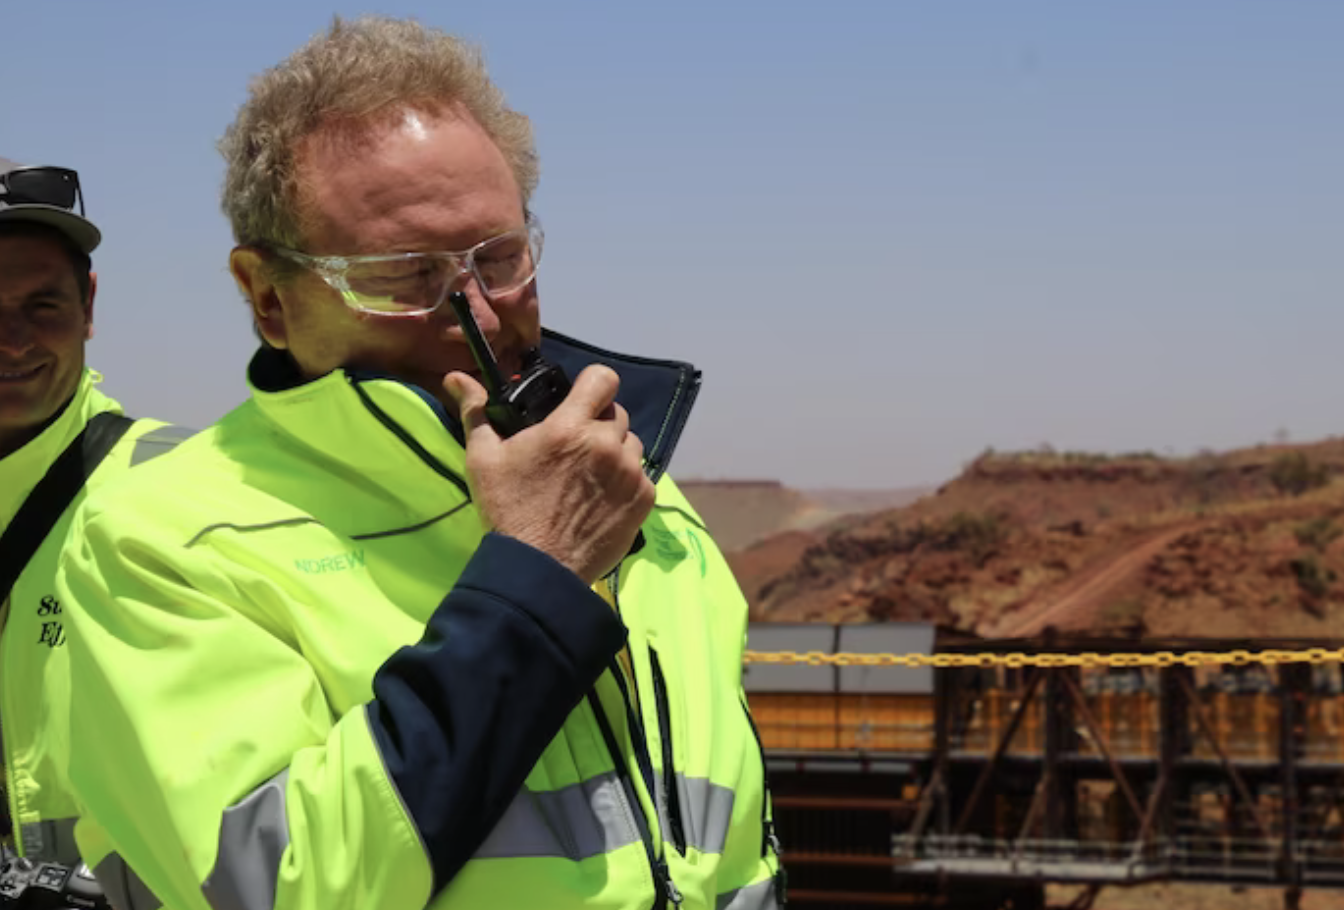 Fortescue Metals Group rail operations expected to resume Wednesday after WA derailment